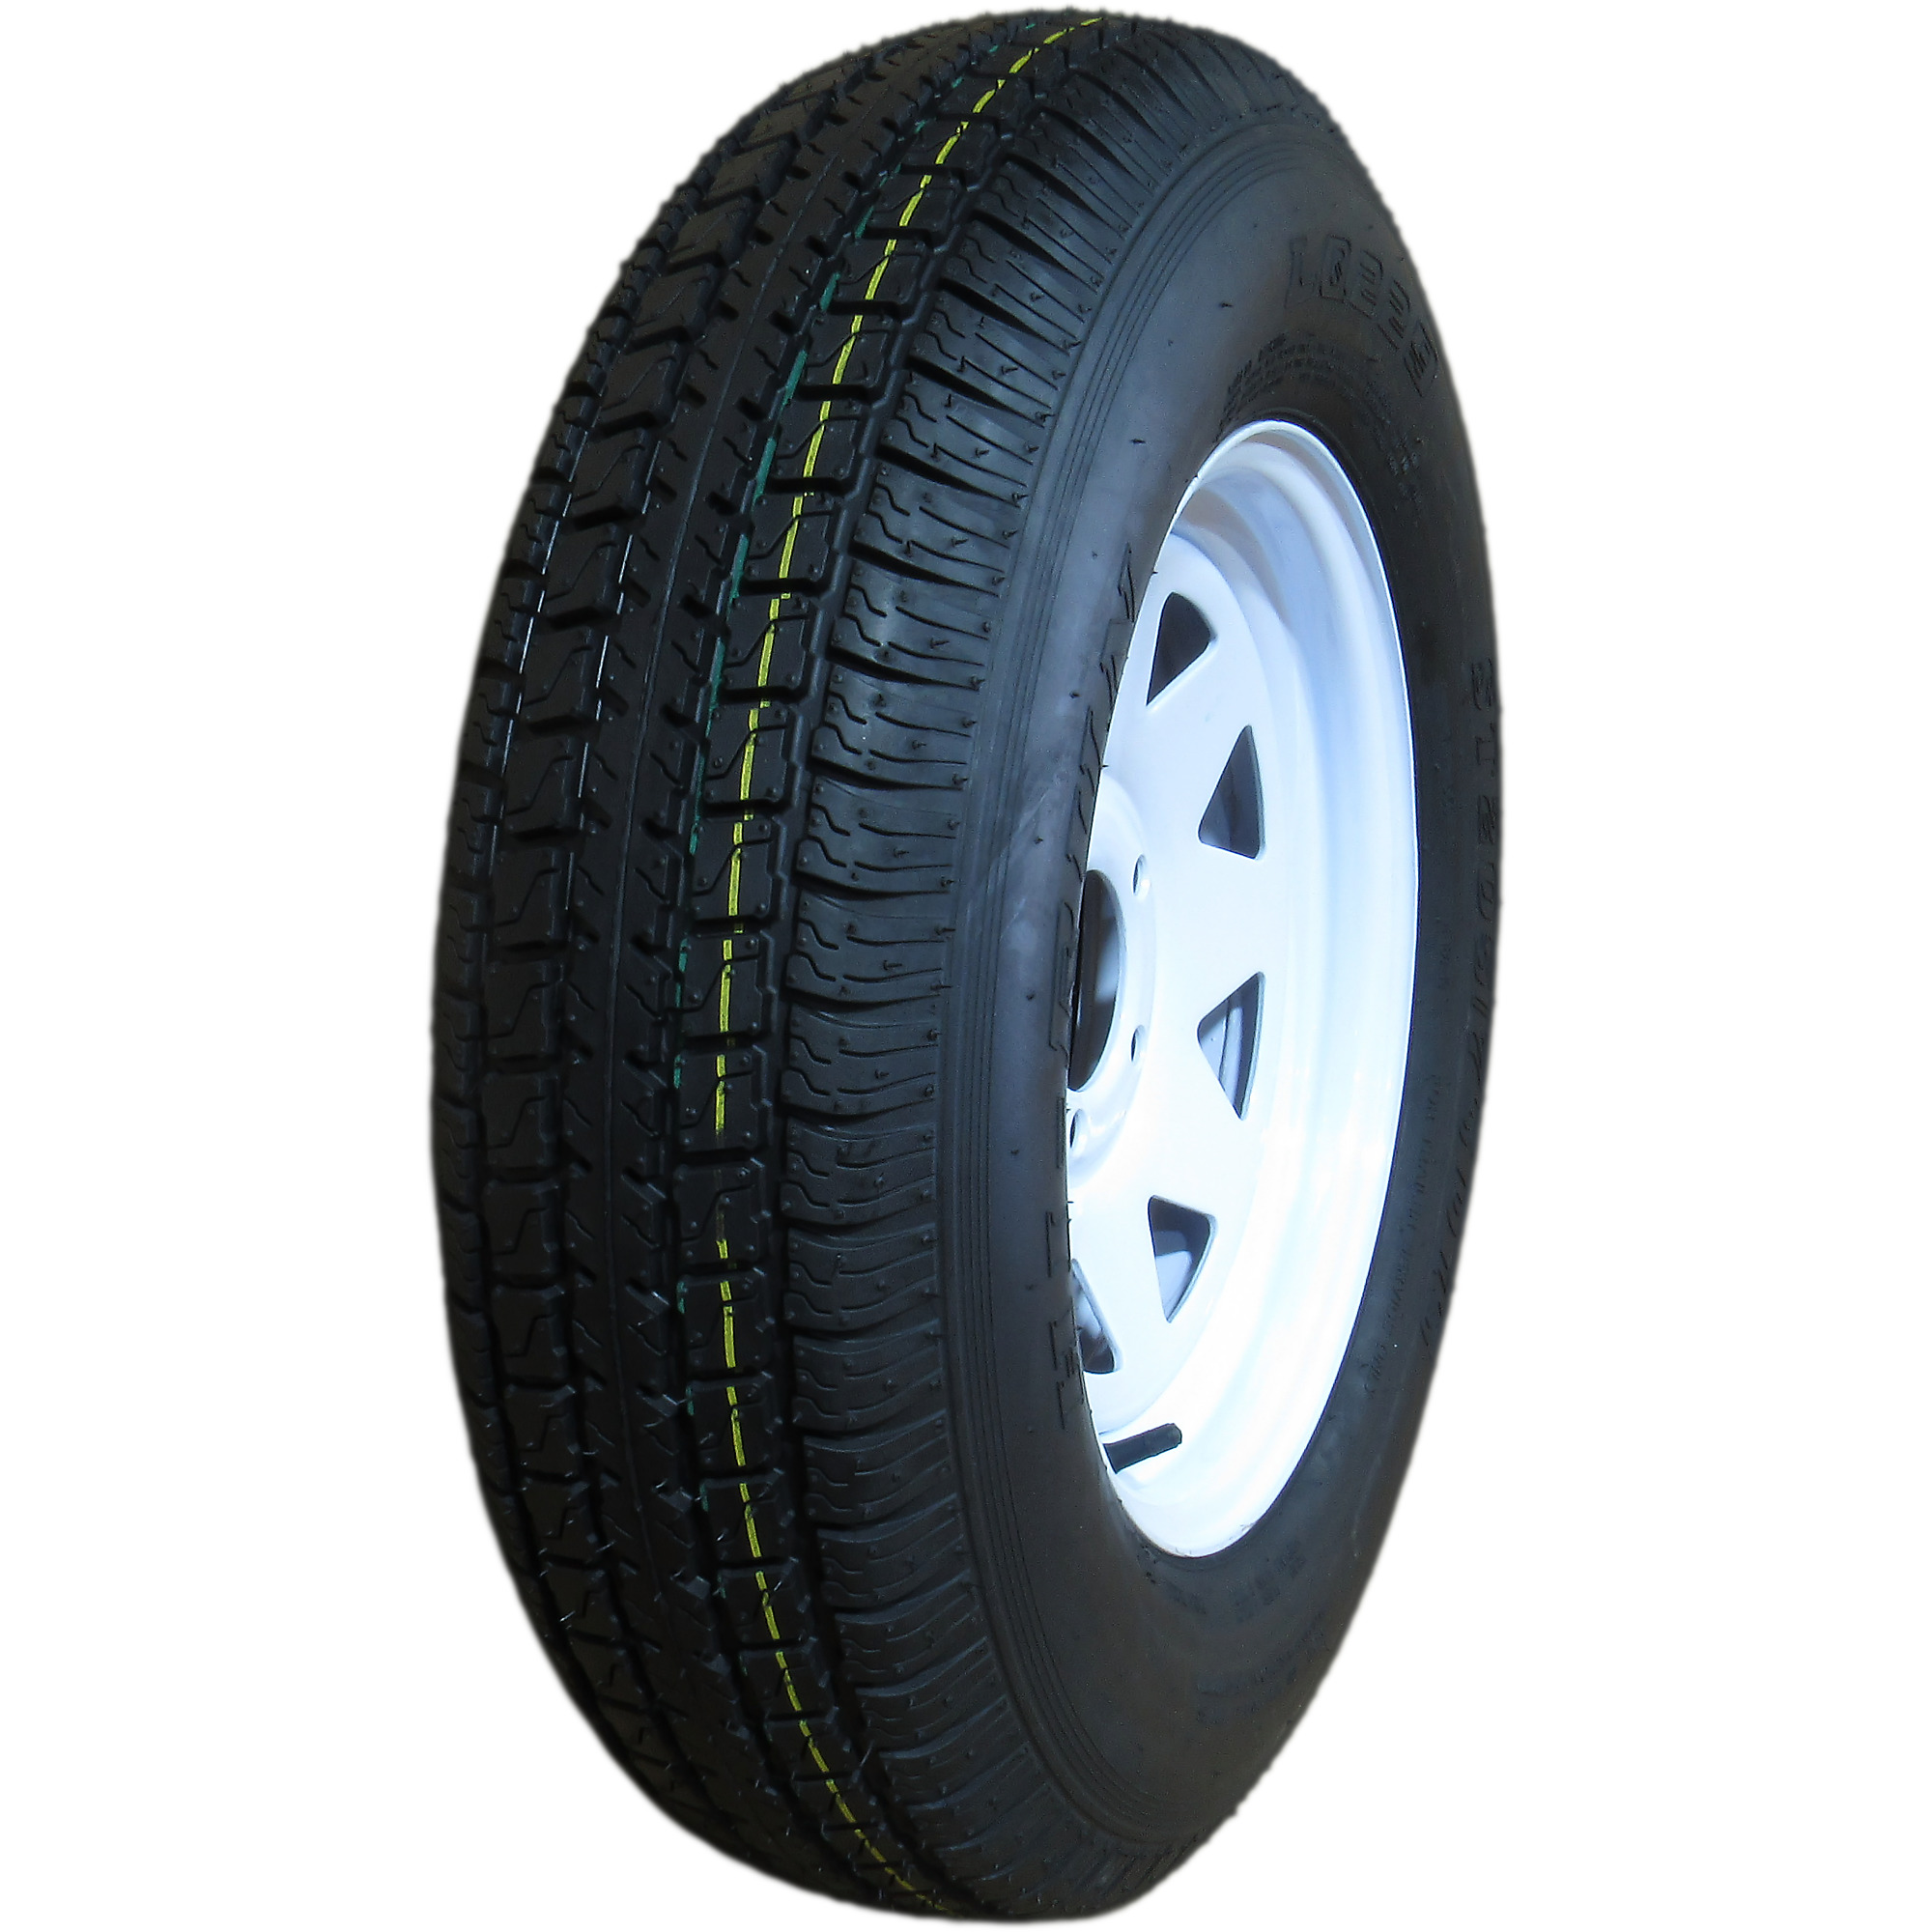 HI-RUN, Highway Trailer Tire Assembly, Bias-Ply, Spoked, Tire Size ST205/75D15 Load Range Rating C, Bolt Holes (qty.) 5 Model ASB1004